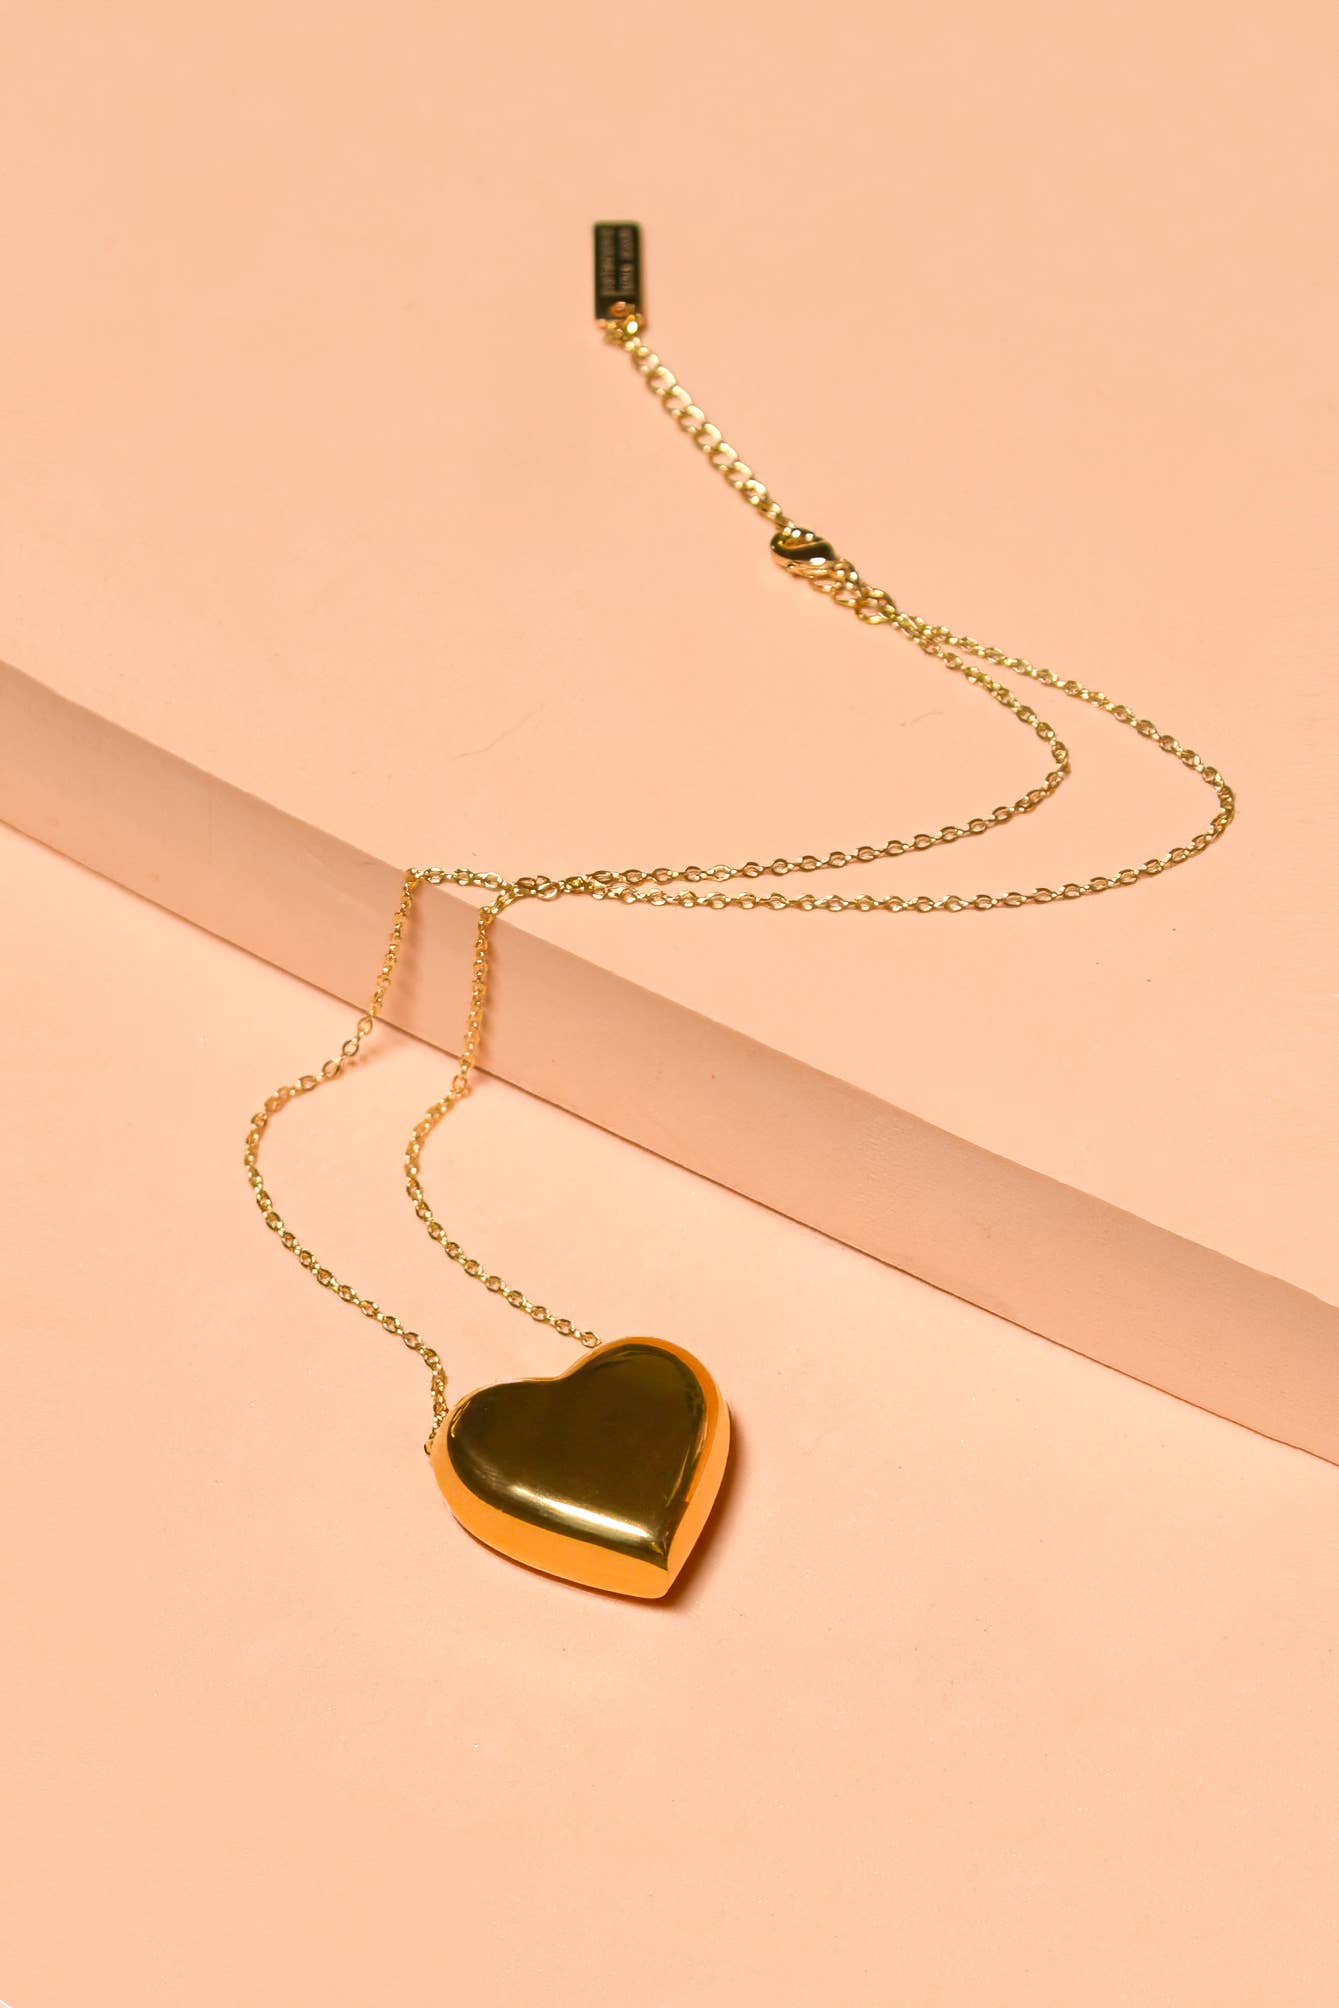 Can't Heartly Wait Necklace - 18K Gold Plated